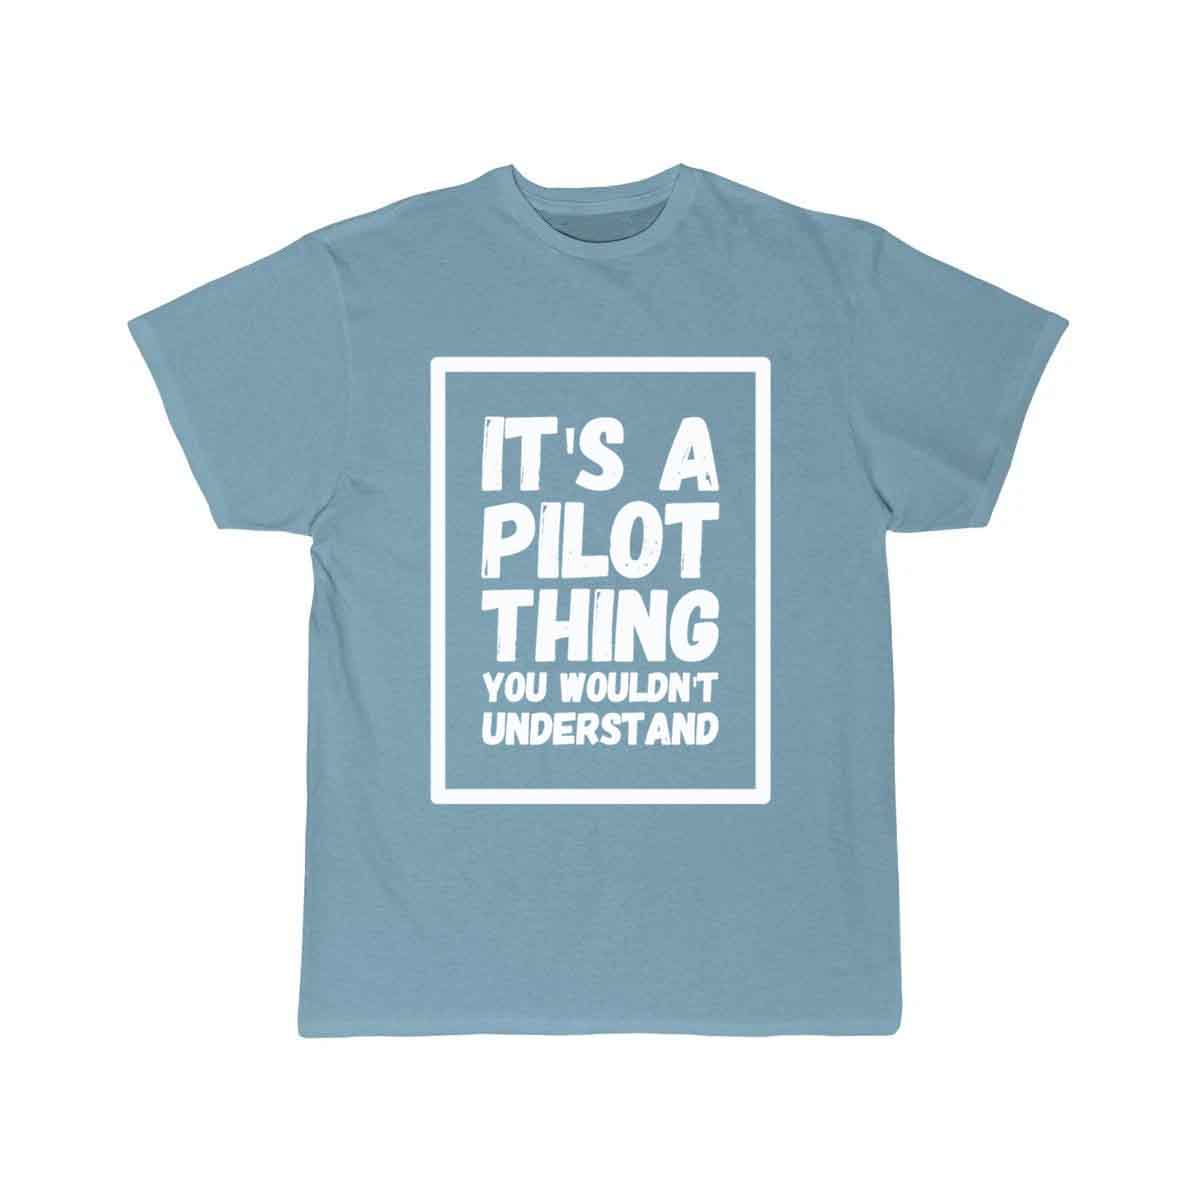 It's a pilot thing you wouldn't understand T-SHIRT THE AV8R